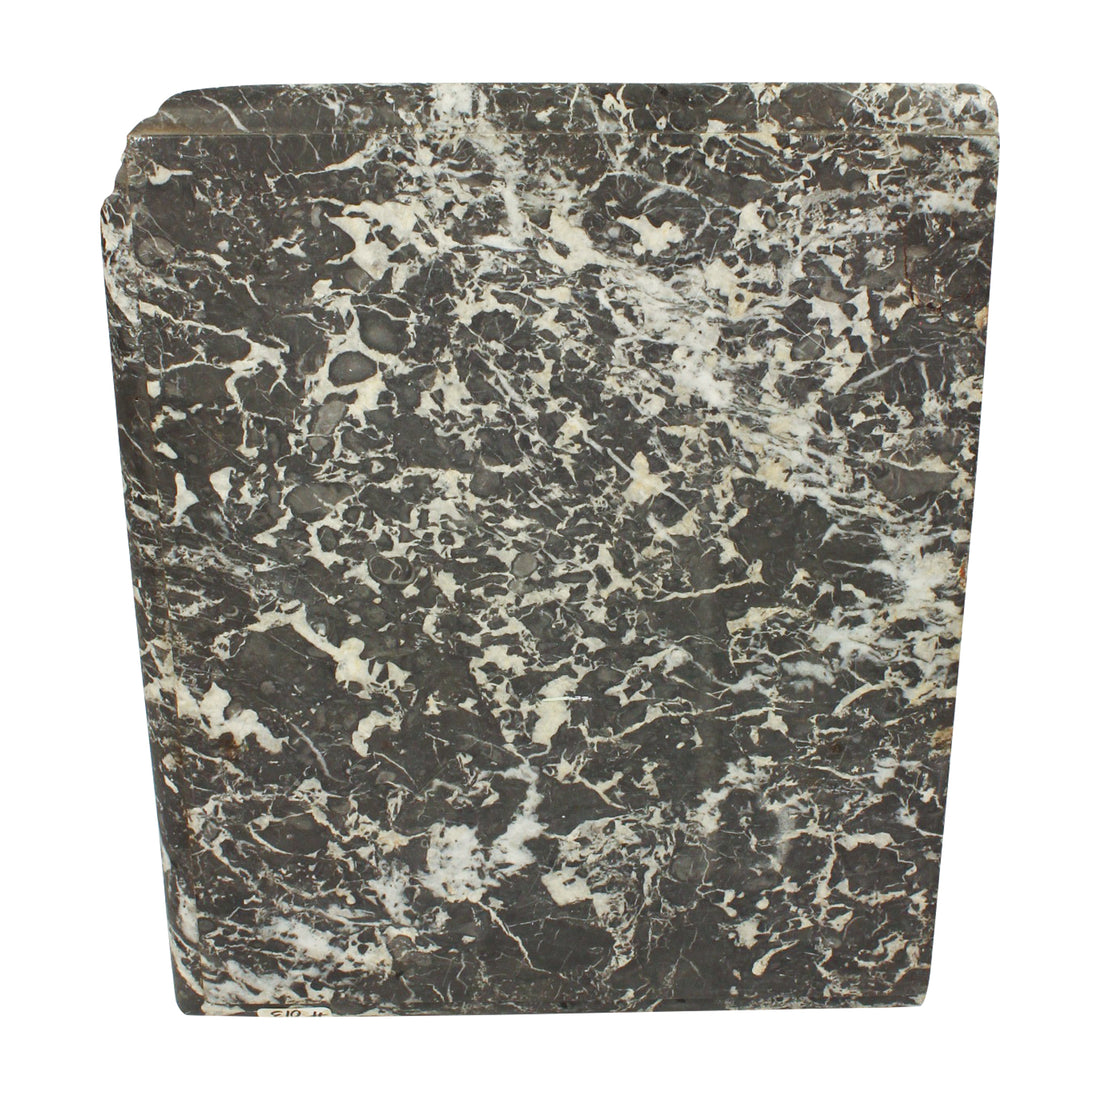 Black Marble Surface